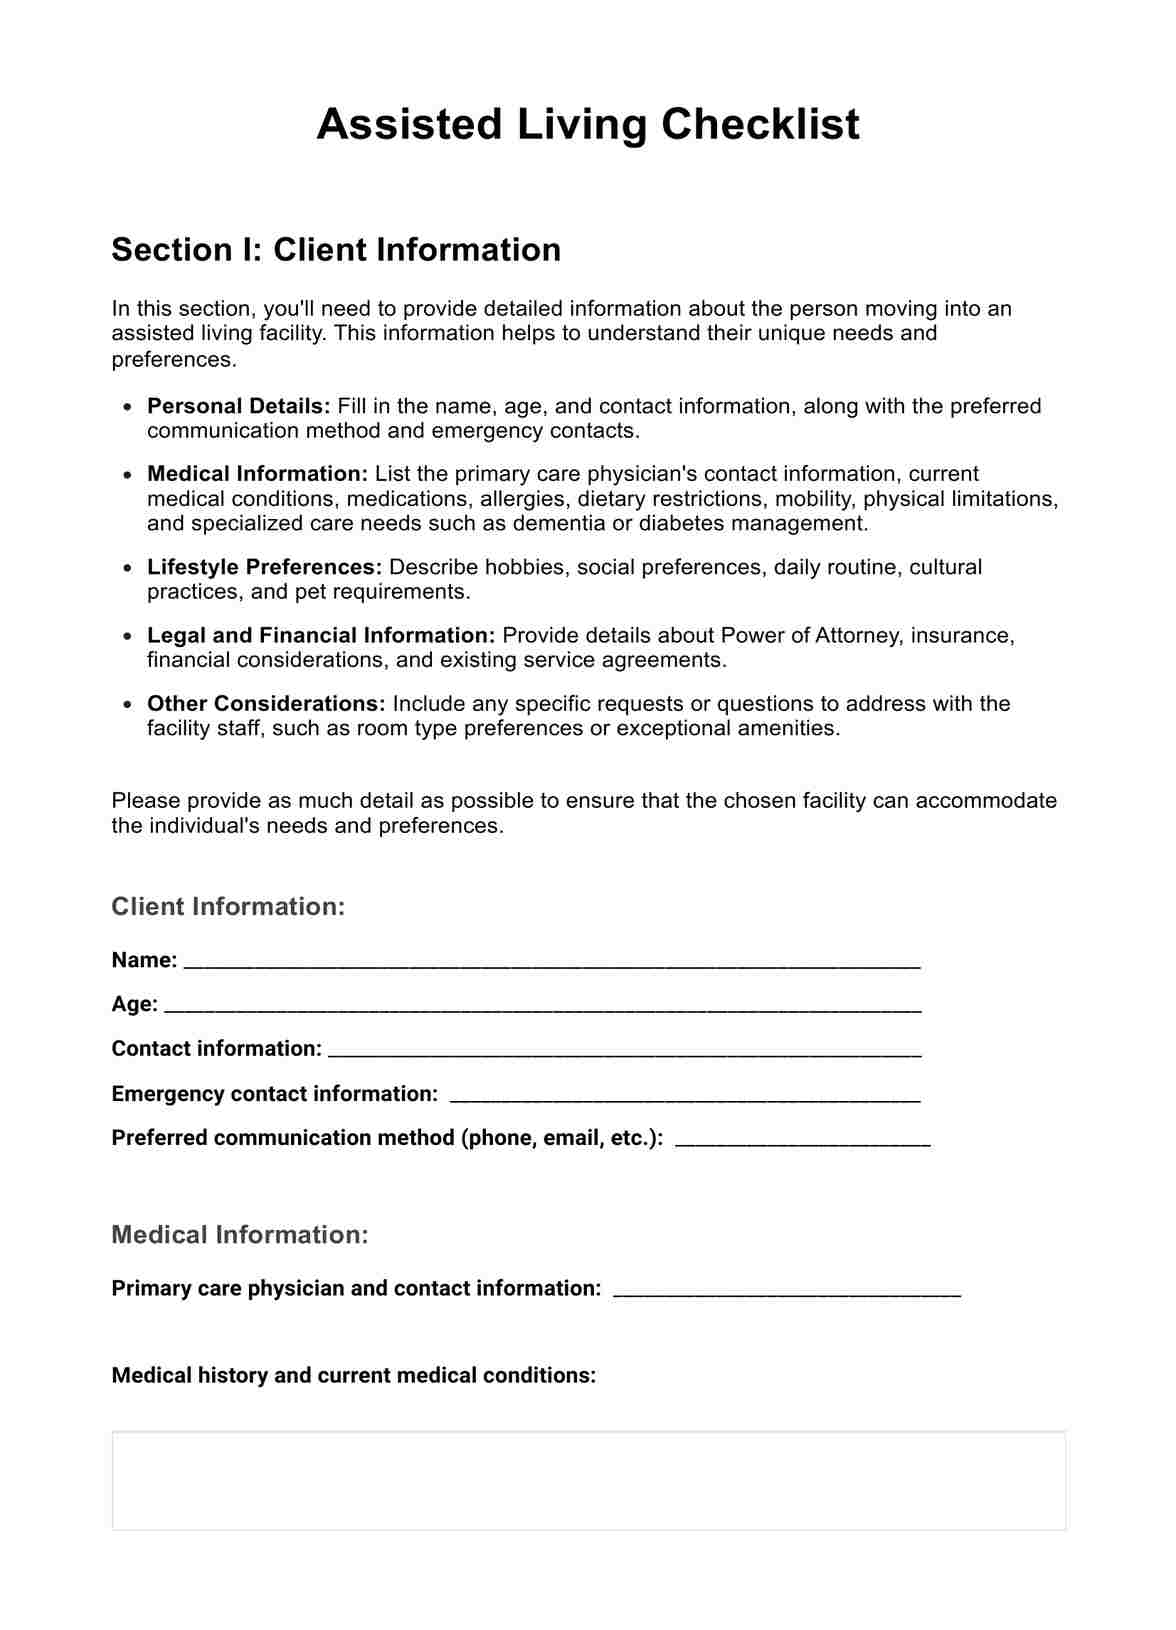 Assisted Living Checklist PDF Example